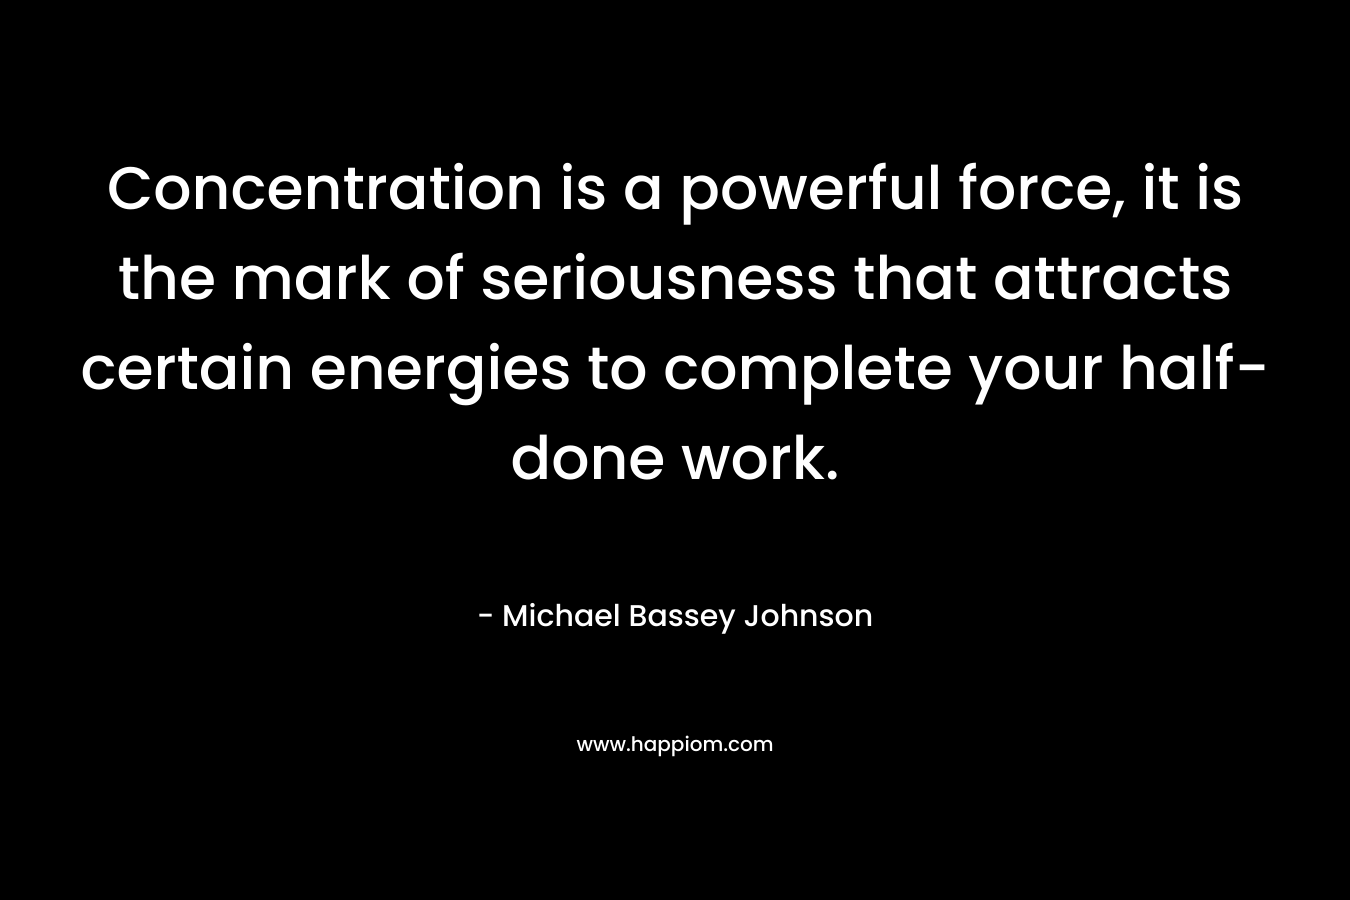 Concentration is a powerful force, it is the mark of seriousness that attracts certain energies to complete your half-done work. – Michael Bassey Johnson